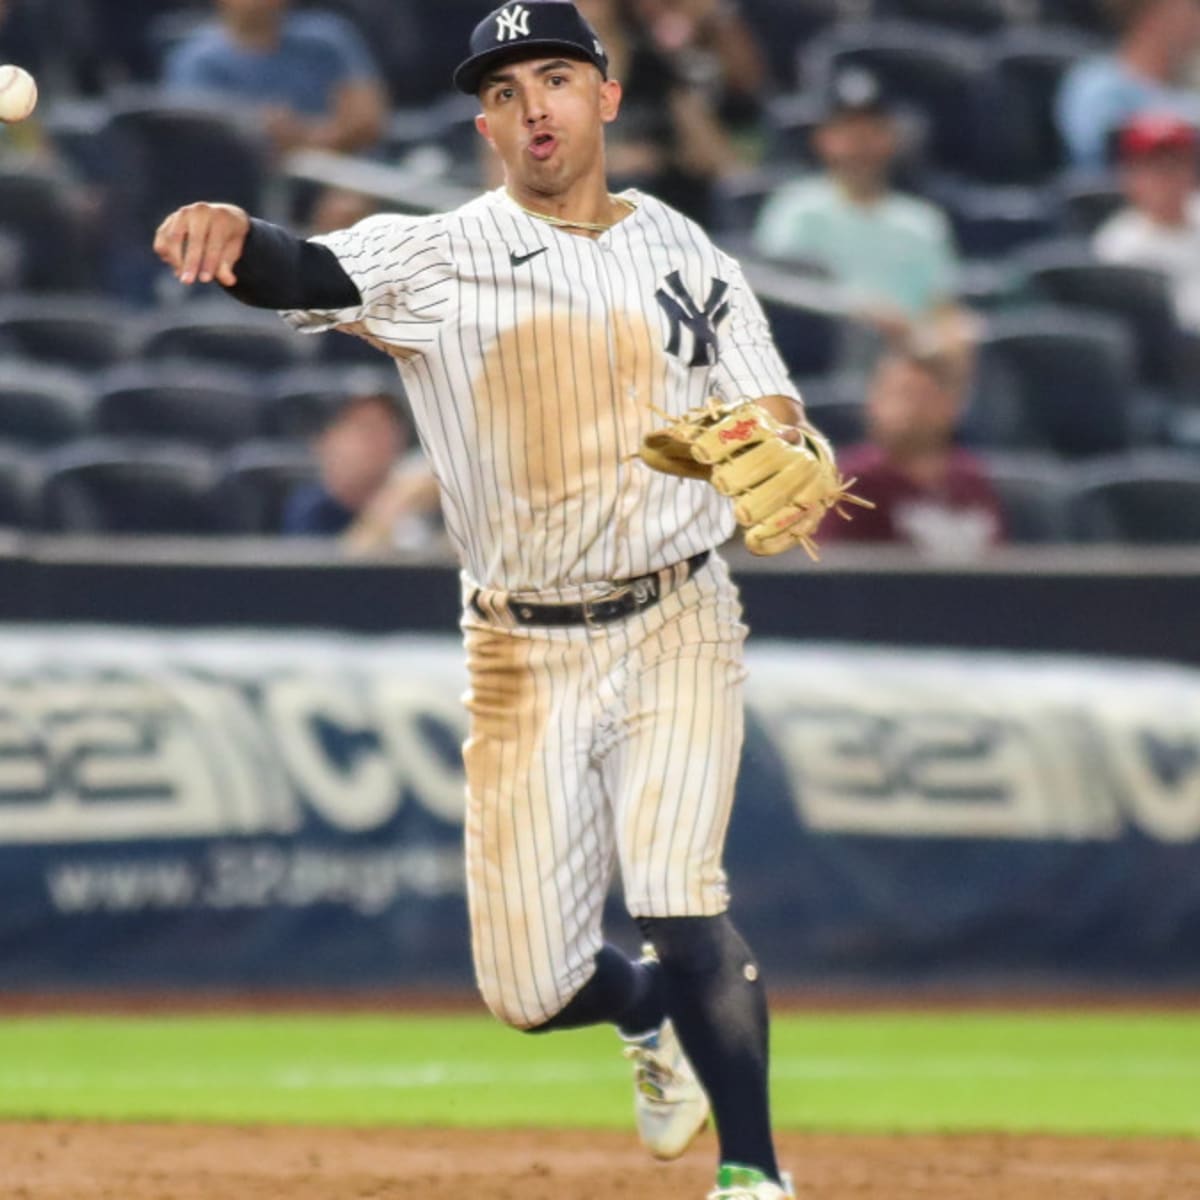 The Yankees' plan to get prospect Oswald Peraza ready